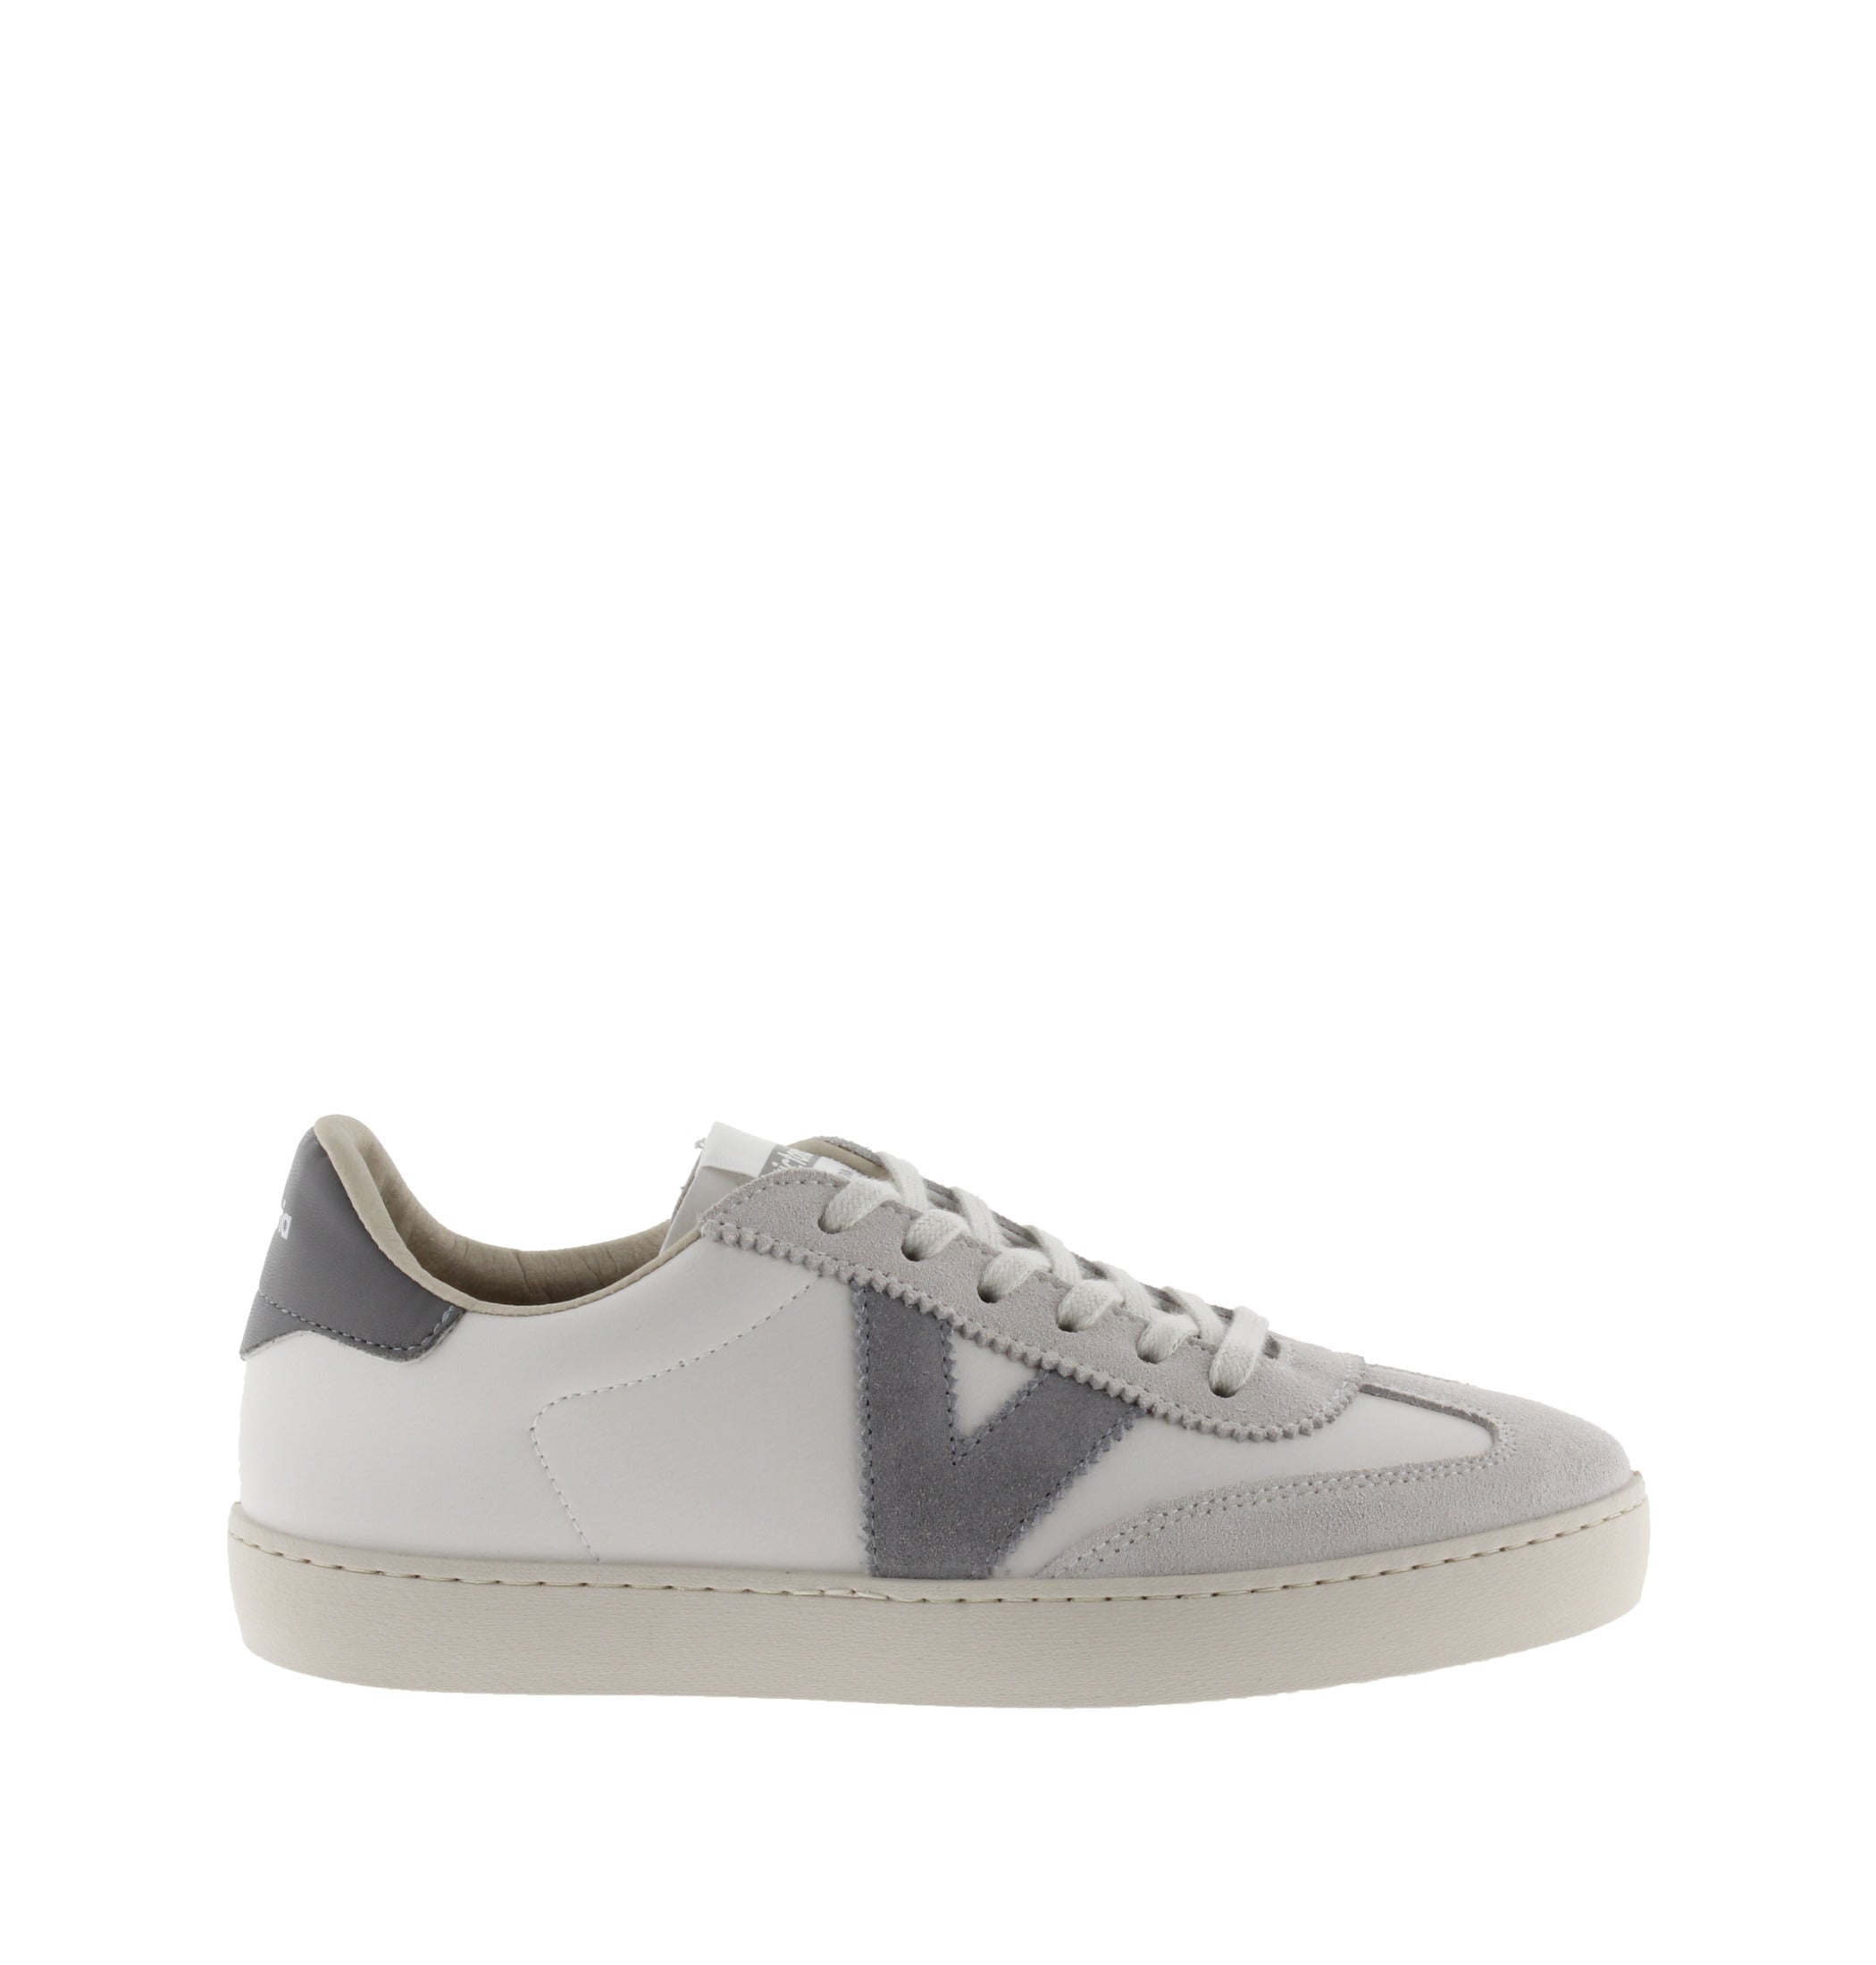 Victoria 1126184 Berlin Ladies Spanish Grey Leather Lace Up Trainers